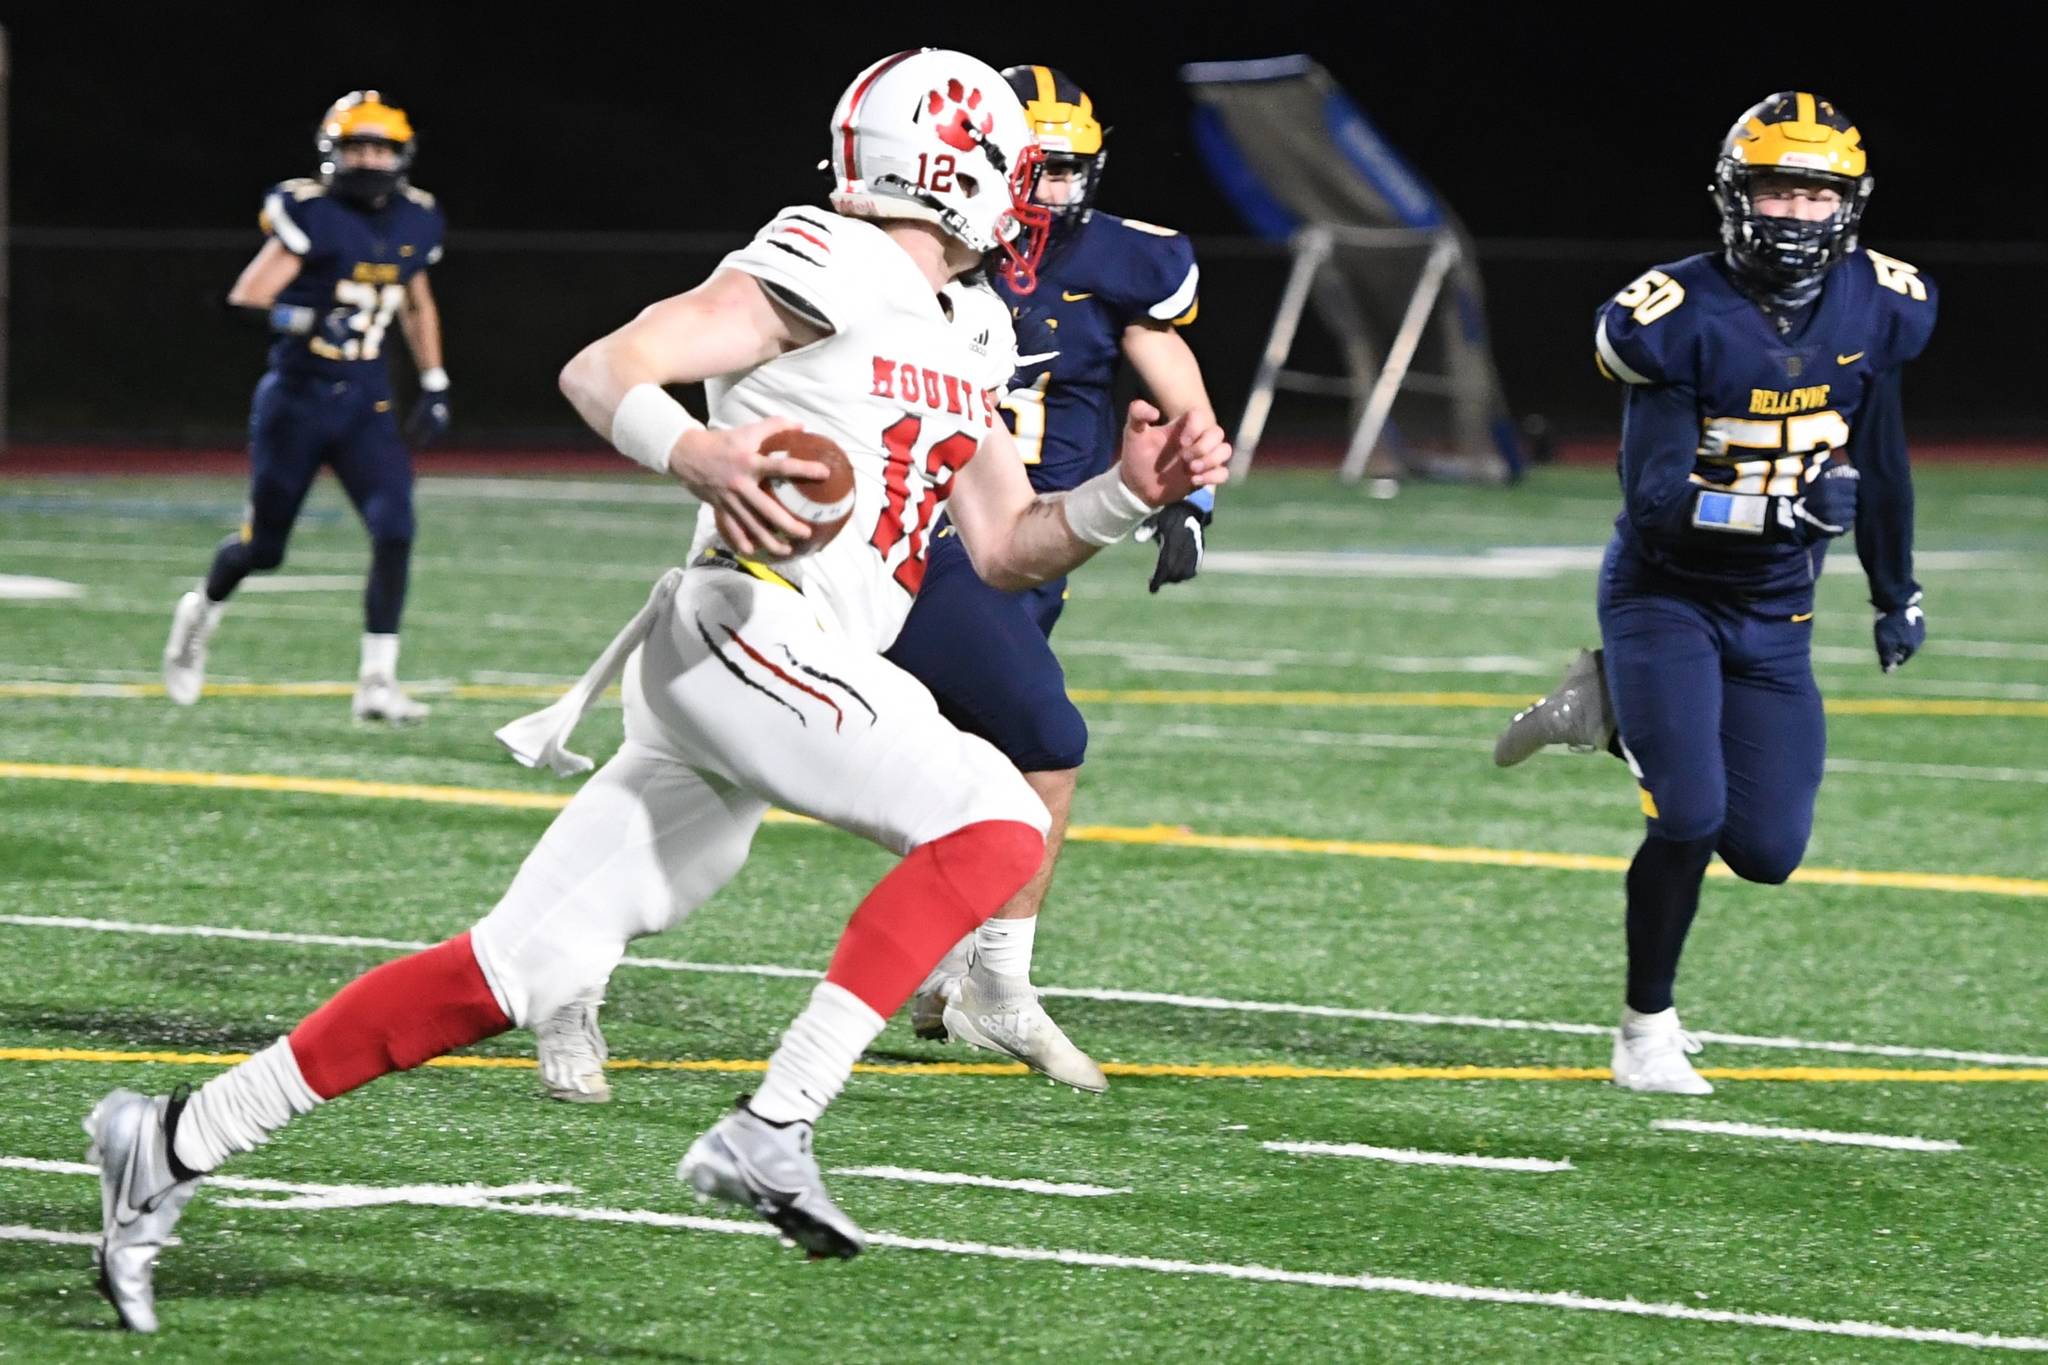 Mt. Si senior quarterback Clay Millen looks for a receiver to connect with during the Wildcats’ 23-13 victory over Bellevue on March 12, 2021. On one play in the second half, Millen broke free from three Bellevue tacklers and threw the ball 30 yards for a touchdown. Millen nailed two touchdown passes to Zach Soliday and one to Jacob Shaffer. Photo courtesy of Calder Productions